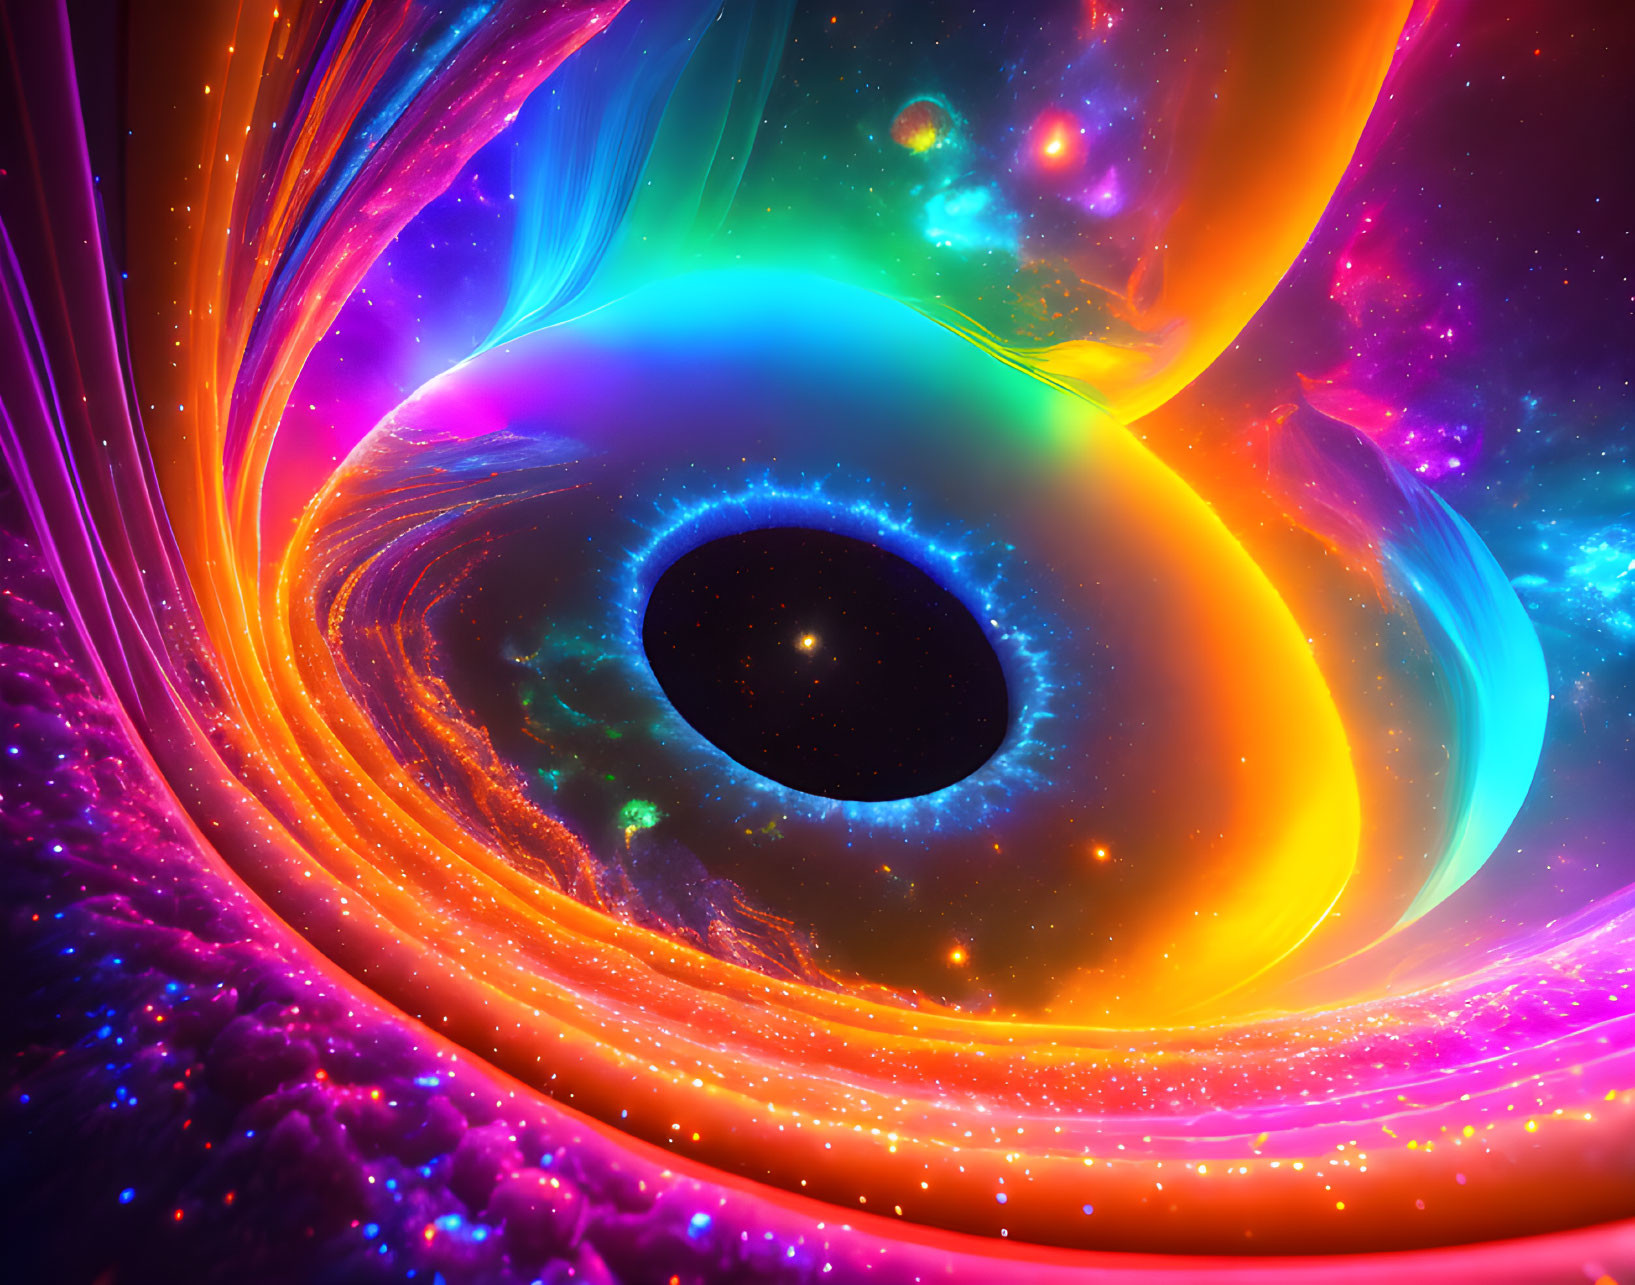 Colorful digital artwork: Black hole with cosmic nebulae in star-filled universe